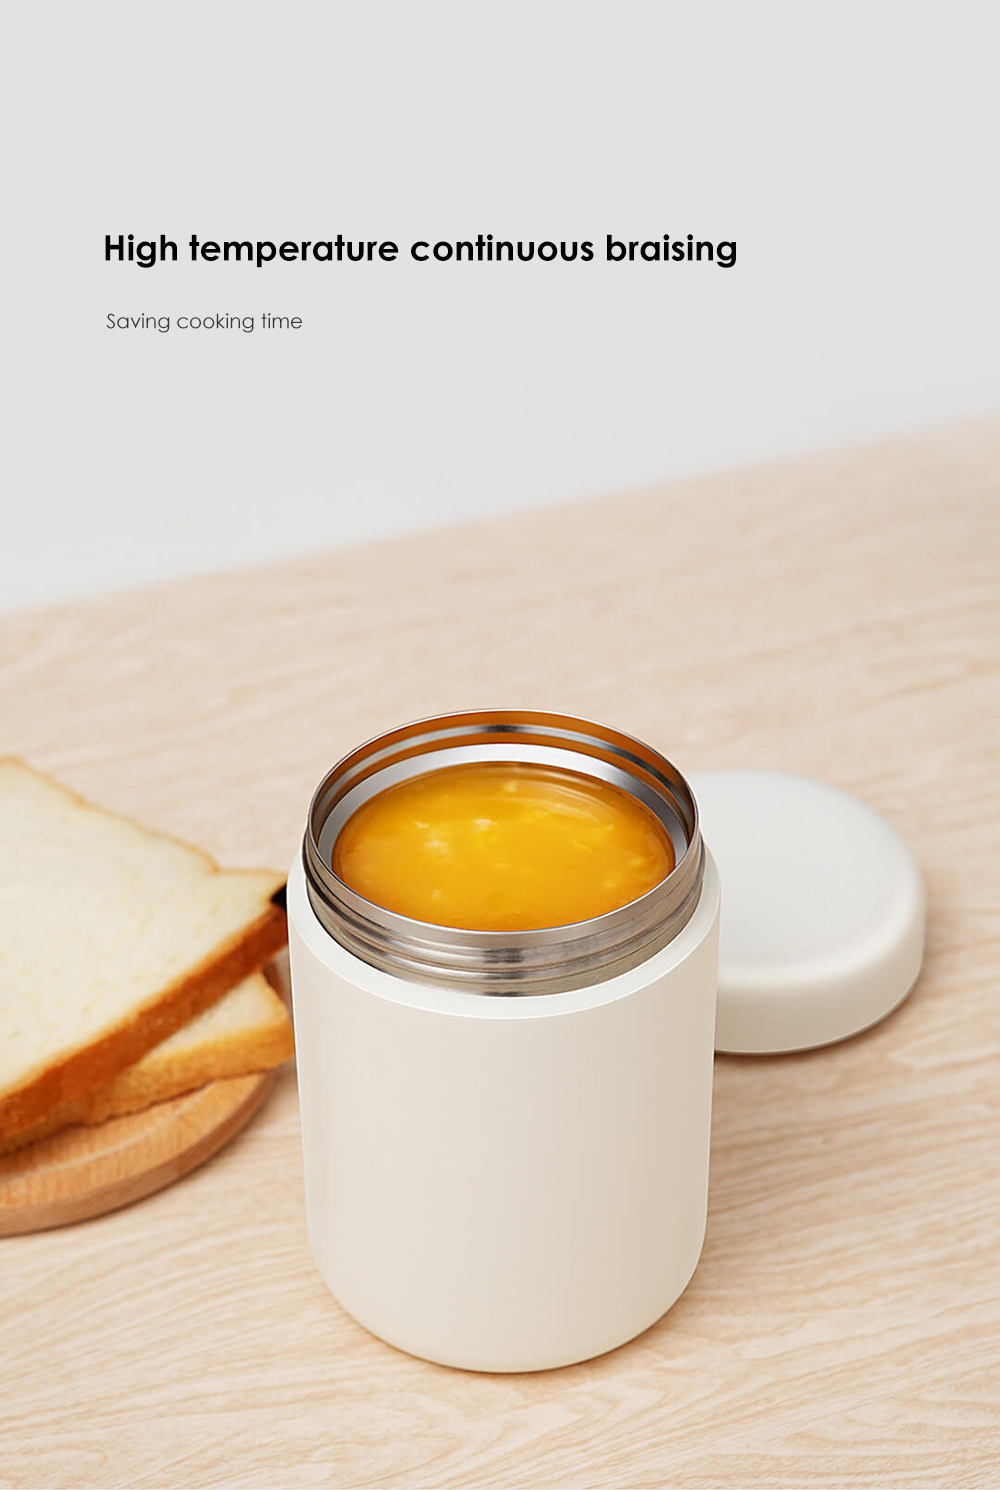 Pinlo Vacuum Insulated Stainless Steel Cooking Thermos Braised Beaker